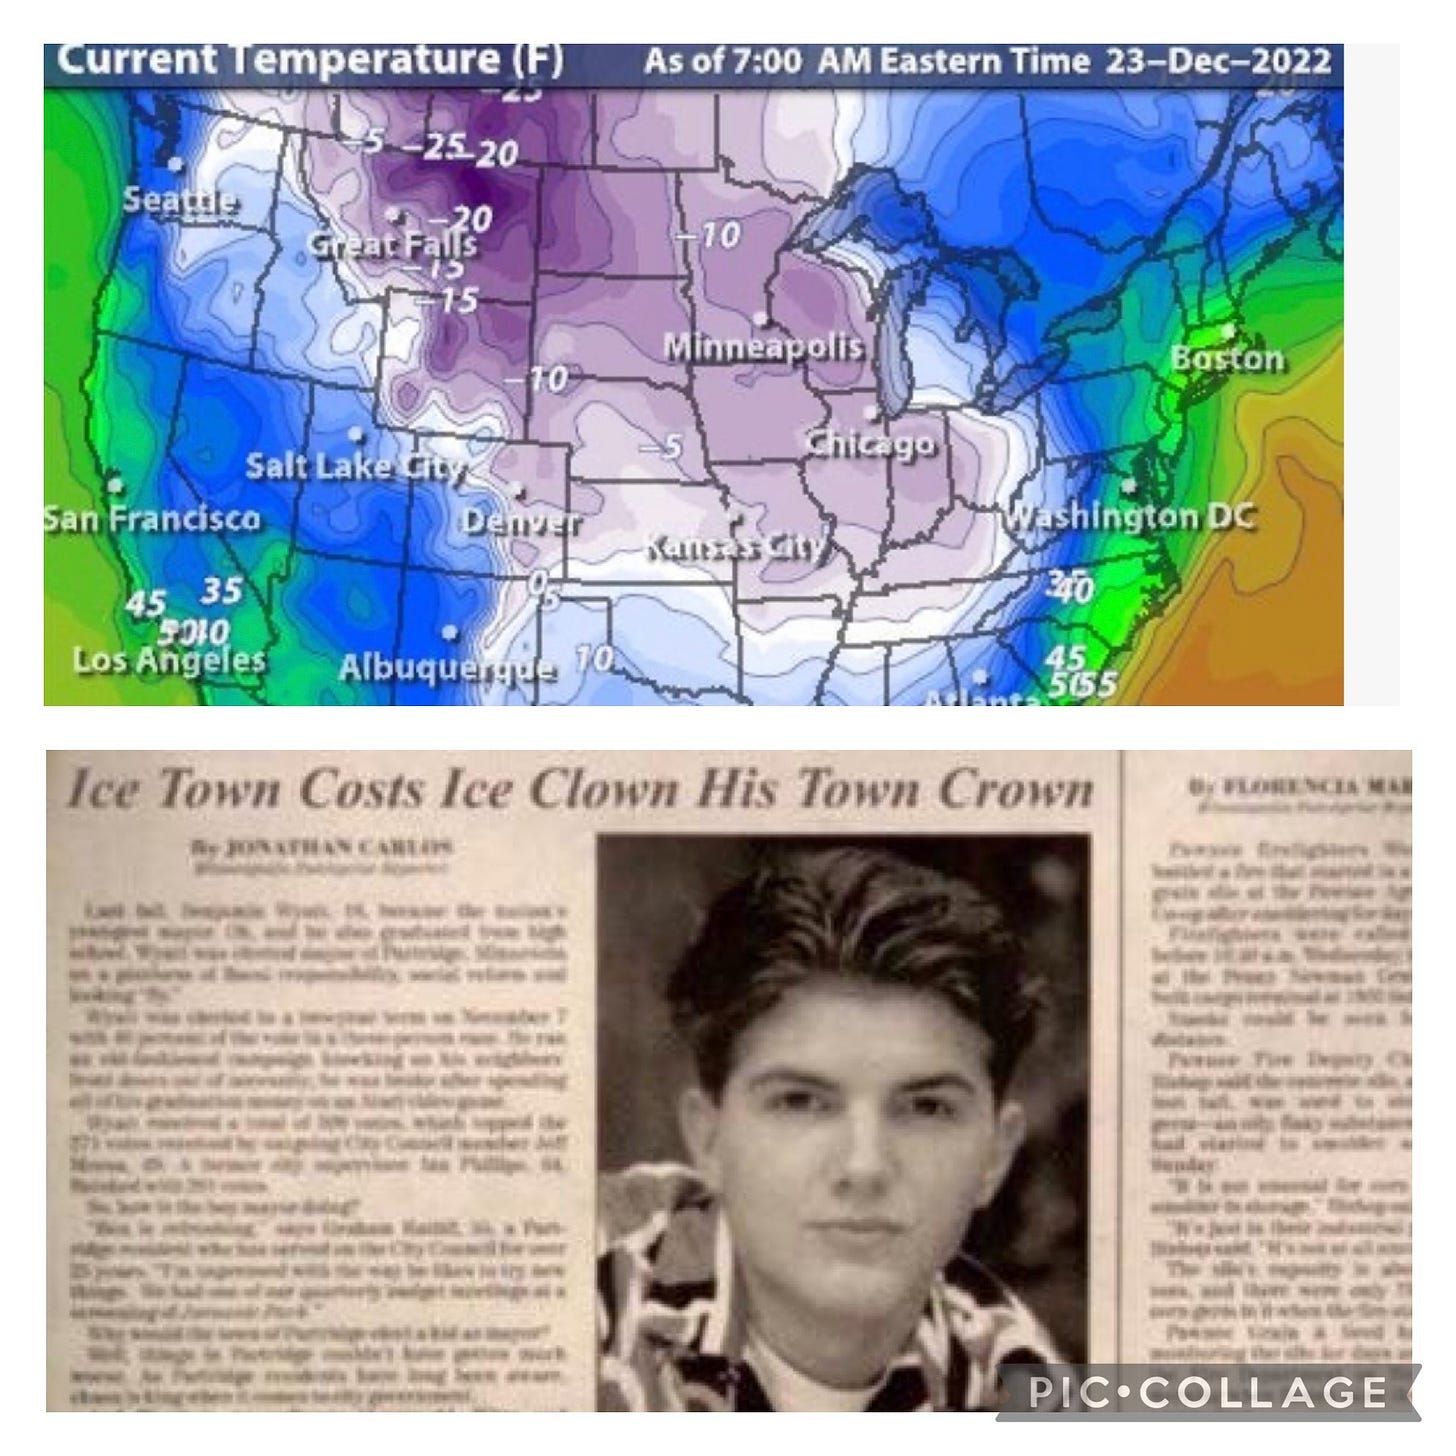 Image of a temperature map of the US with the majority of the country in single or negative digit temps over an image from the show Parks & Rec of a fictional headline from the show about character Ben Wyatt: "Ice Town Costs Ice Clown His Town Crown"